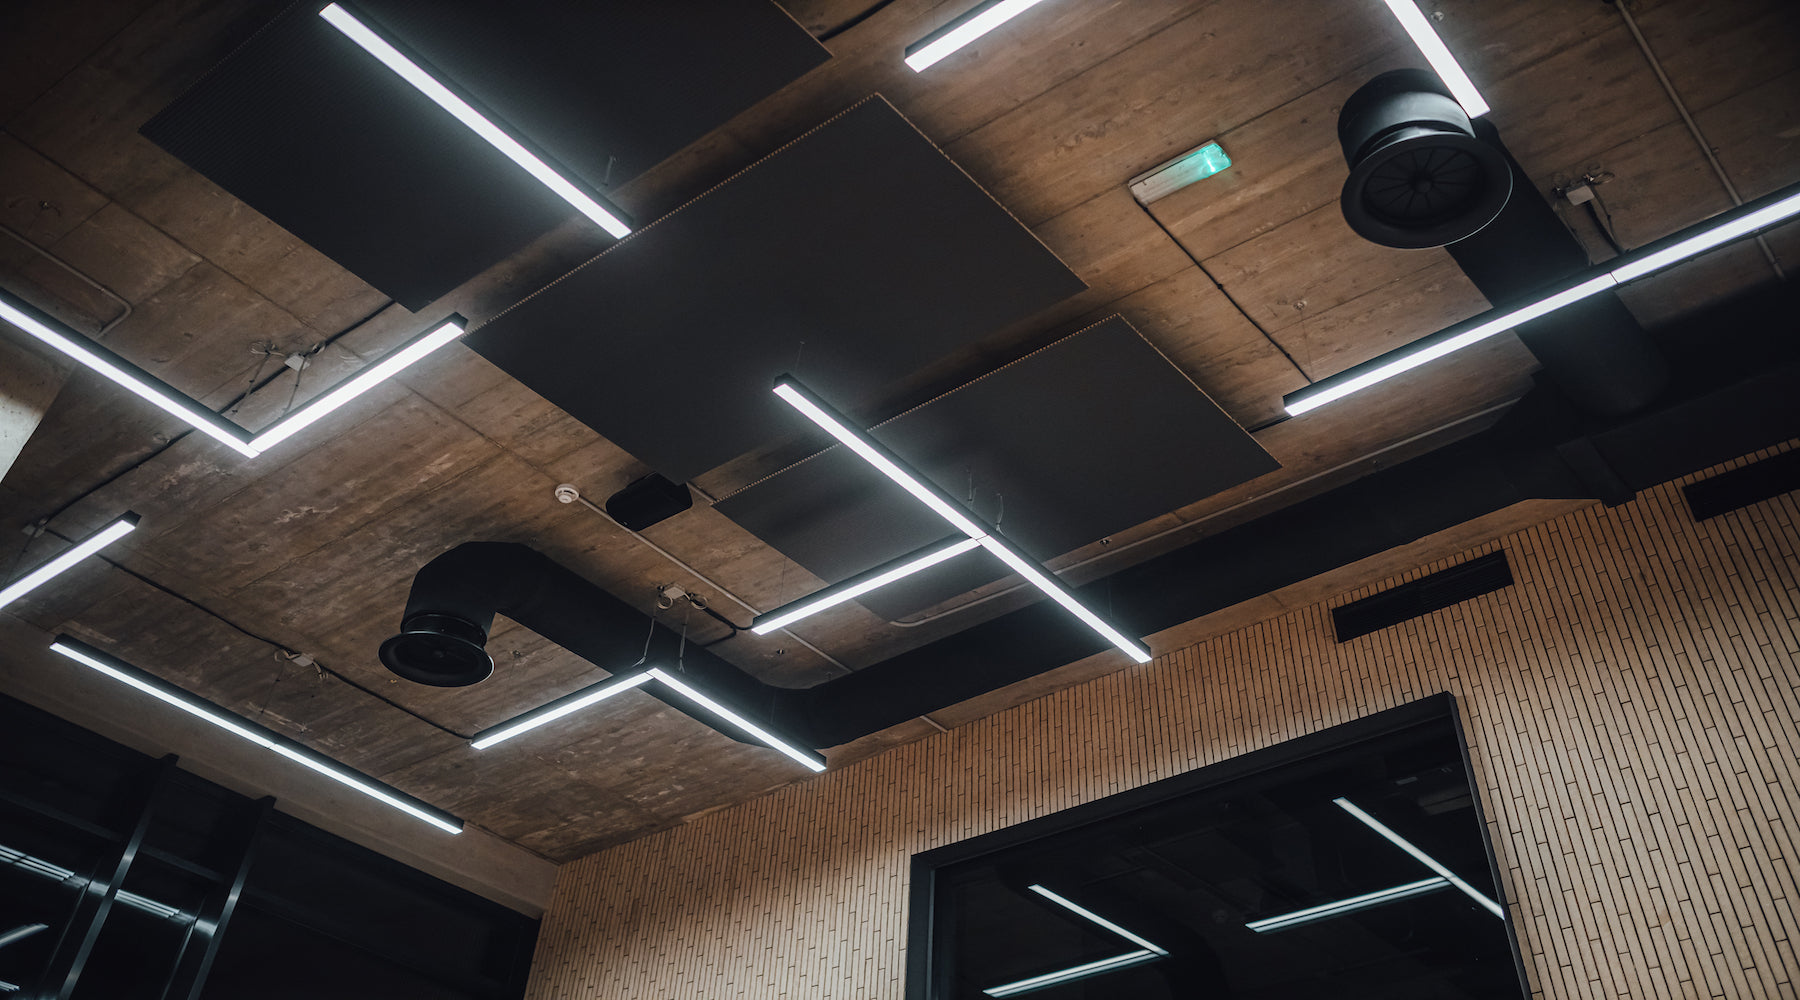 LED lights suspended from ceiling in a commercial building space